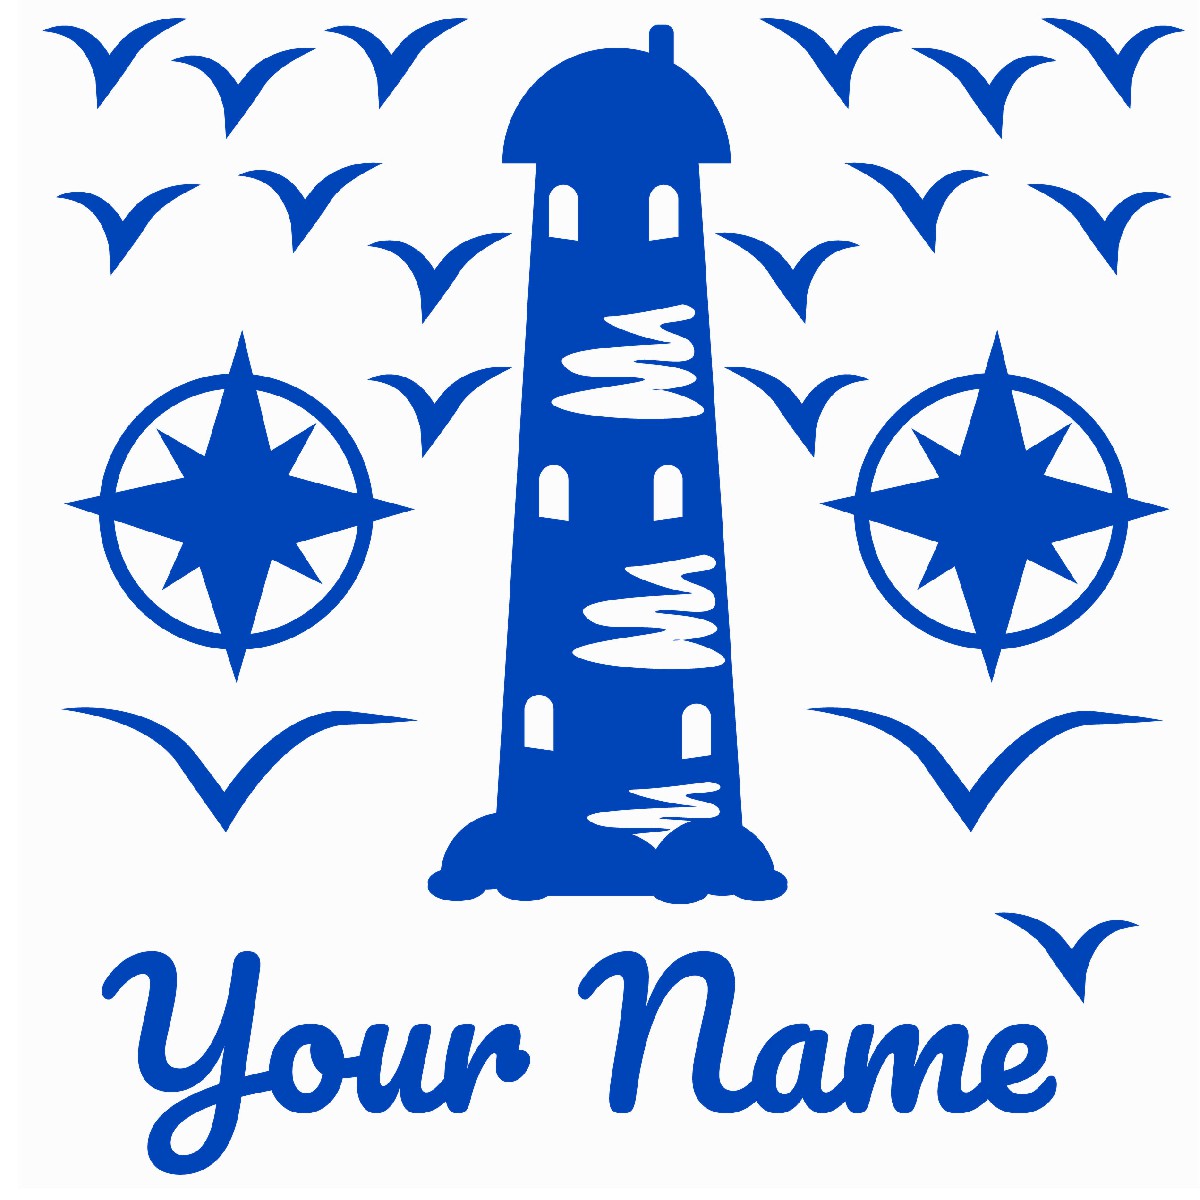 Personalized Name Stickers with Lighthouse Compass Seagull - Easily-Applied Name Decals for Walls Furniture Laptop - Unique Custom Name Stickers for Kids Bedroom